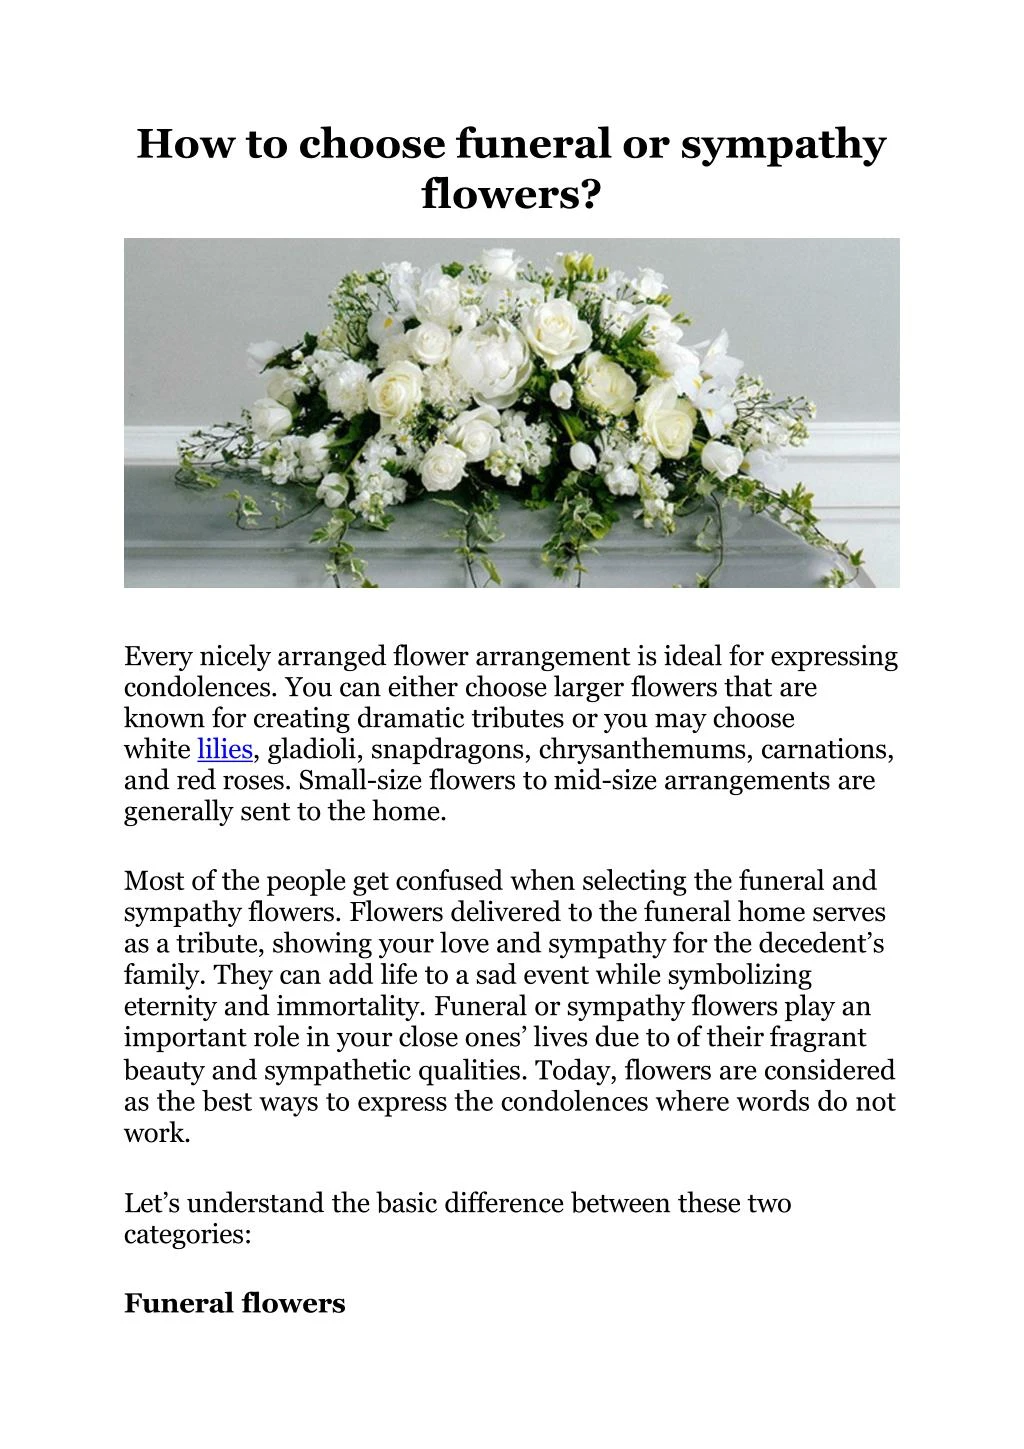 how to choose funeral or sympathy flowers